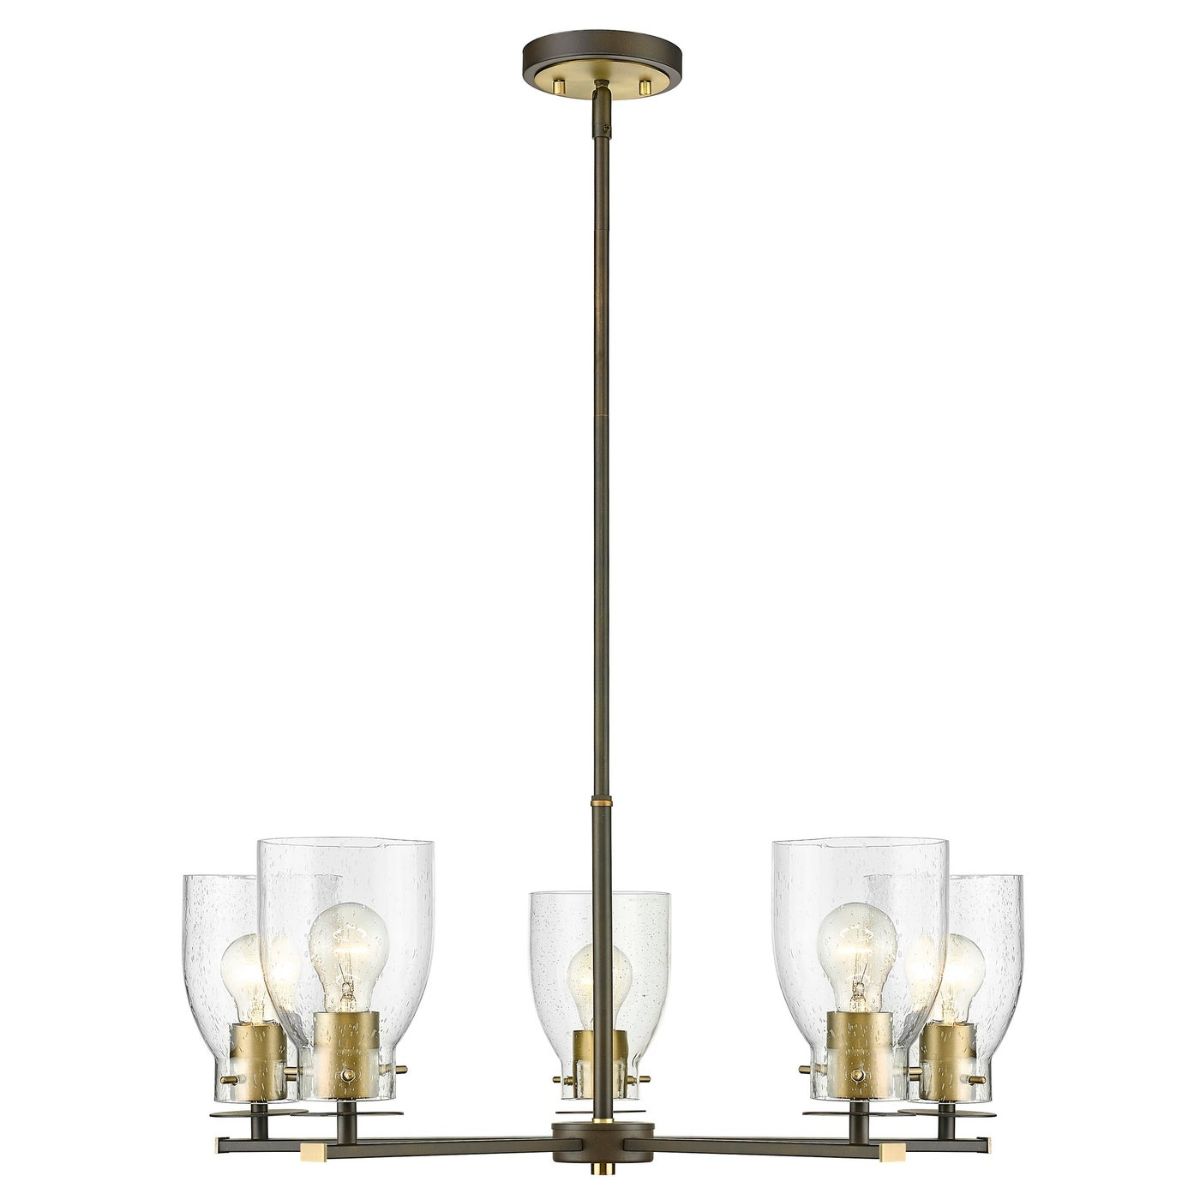 Shelby 28 in. 5 Lights Chandelier Oil Rubbed Bronze & Antique Brass Finish